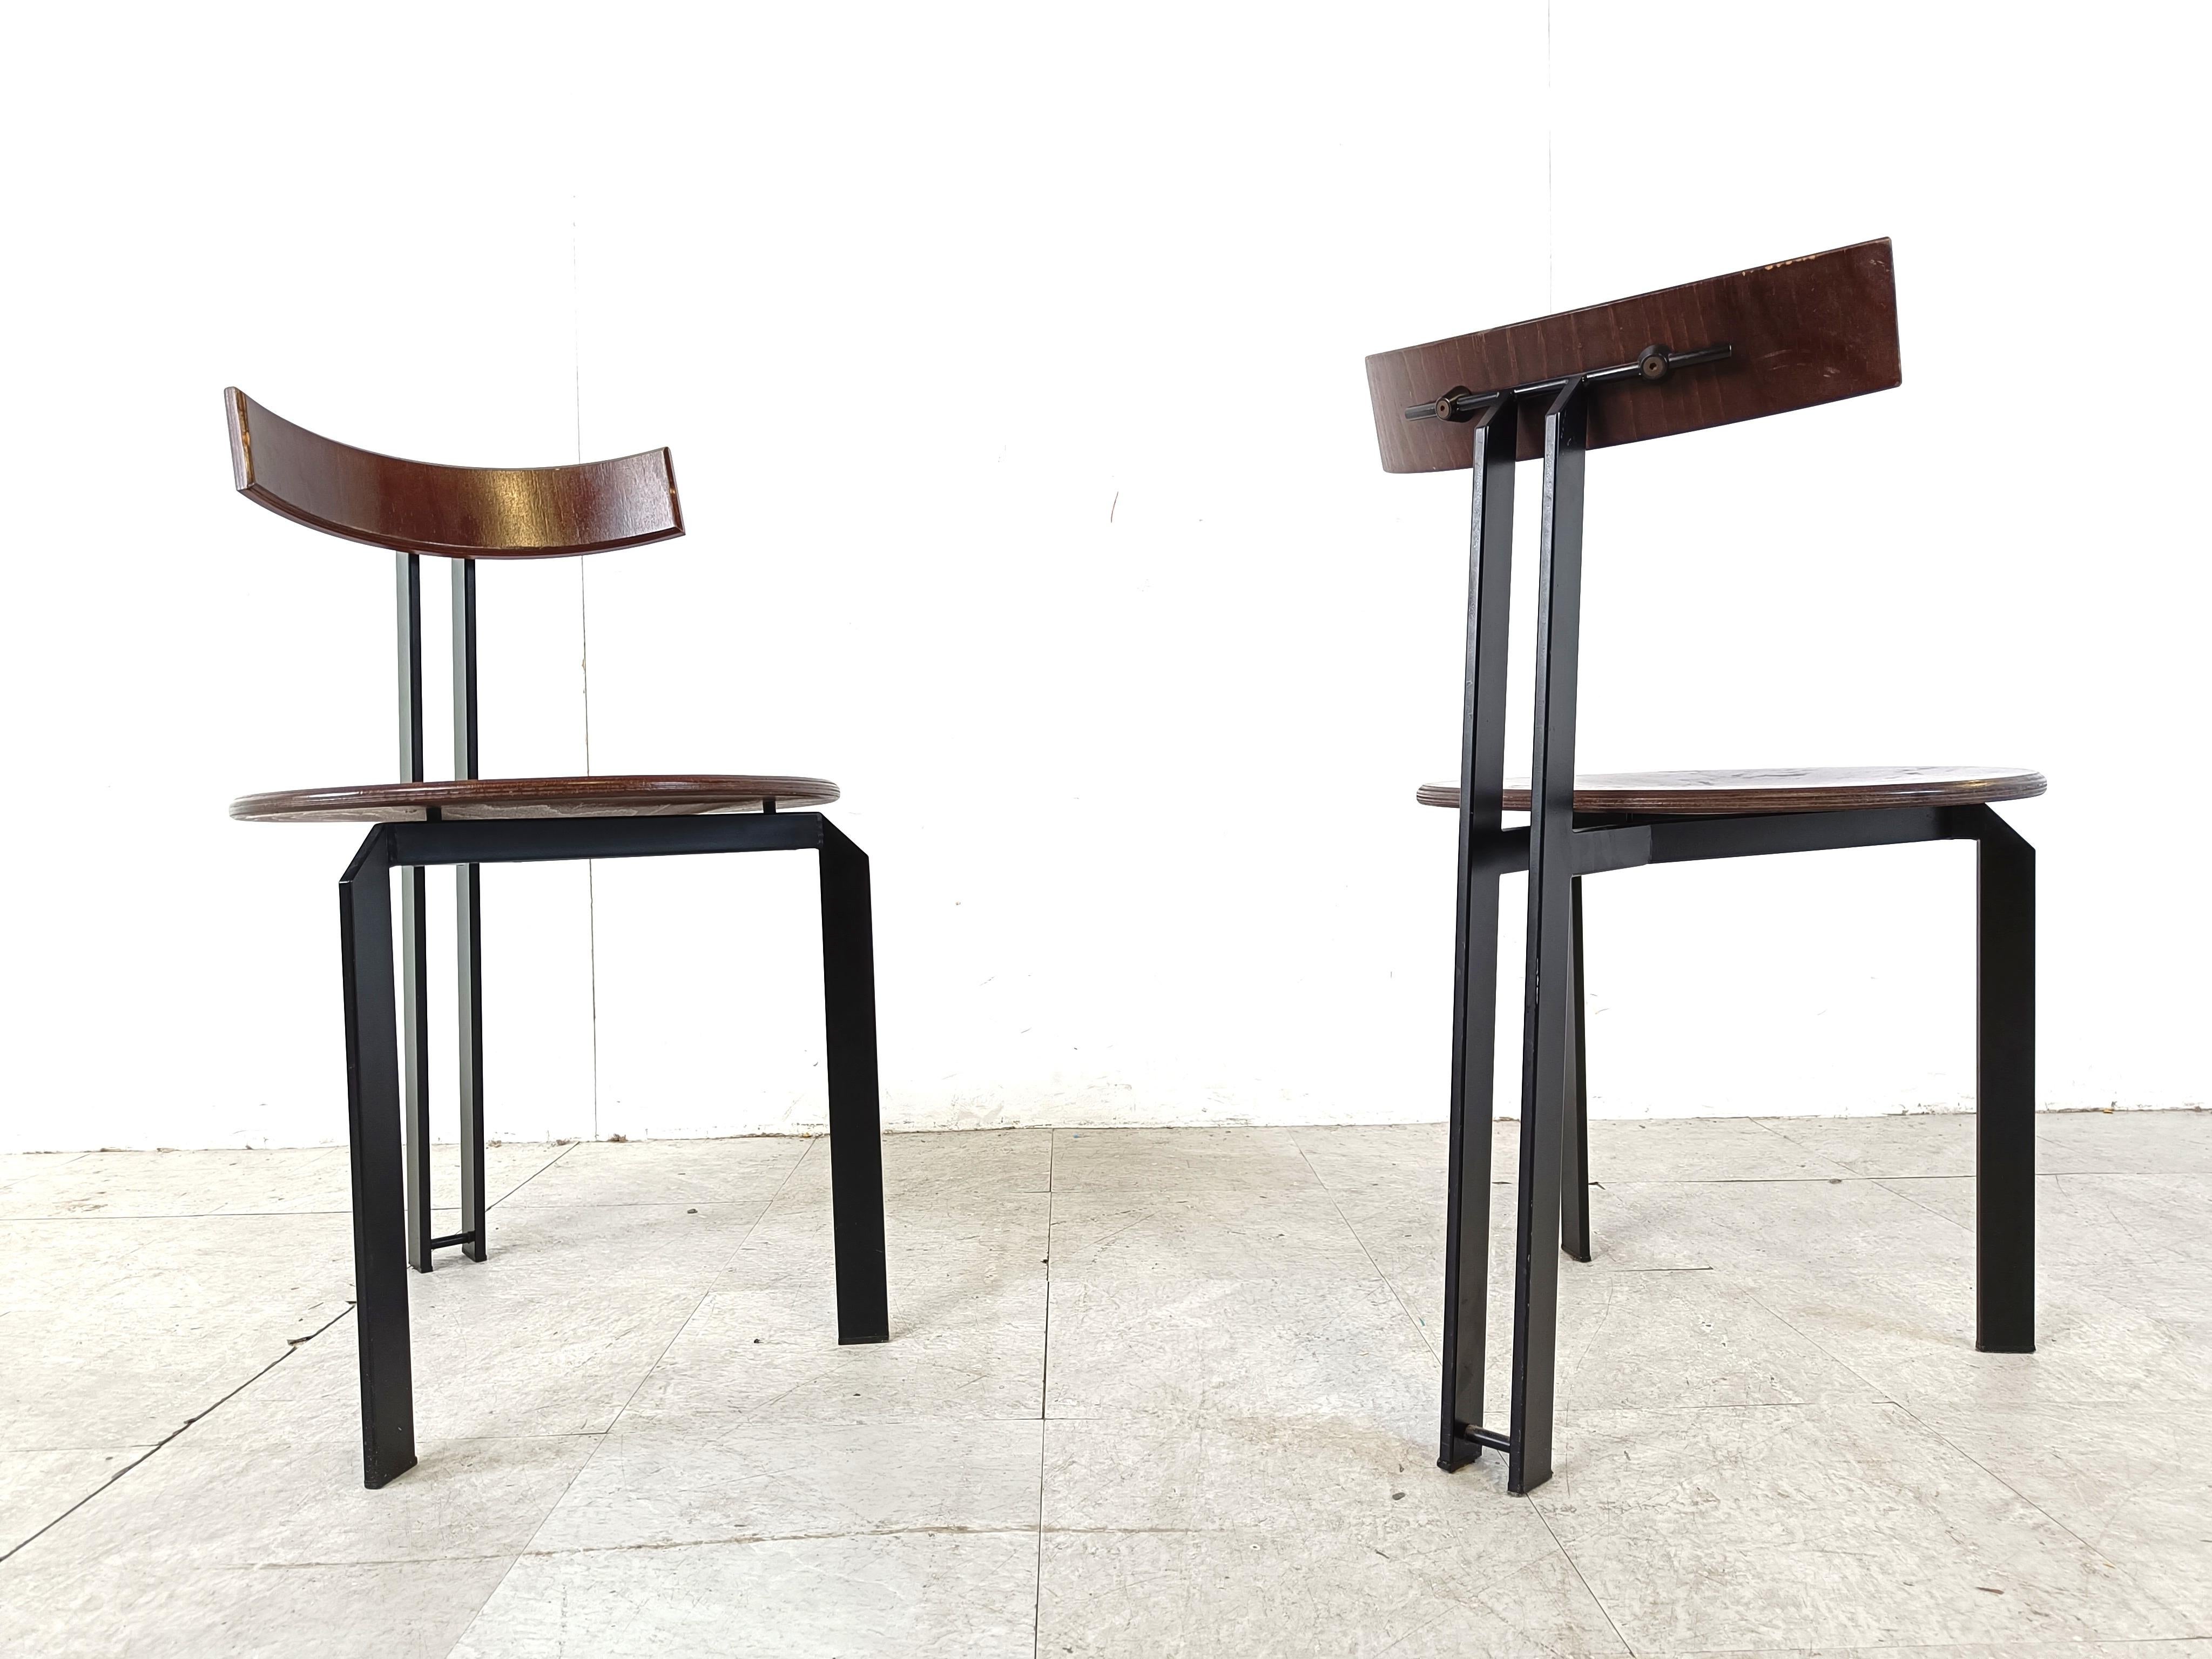 Metal Post modern Zeta dining chairs by Martin Haksteen for Harvink, 1980s For Sale